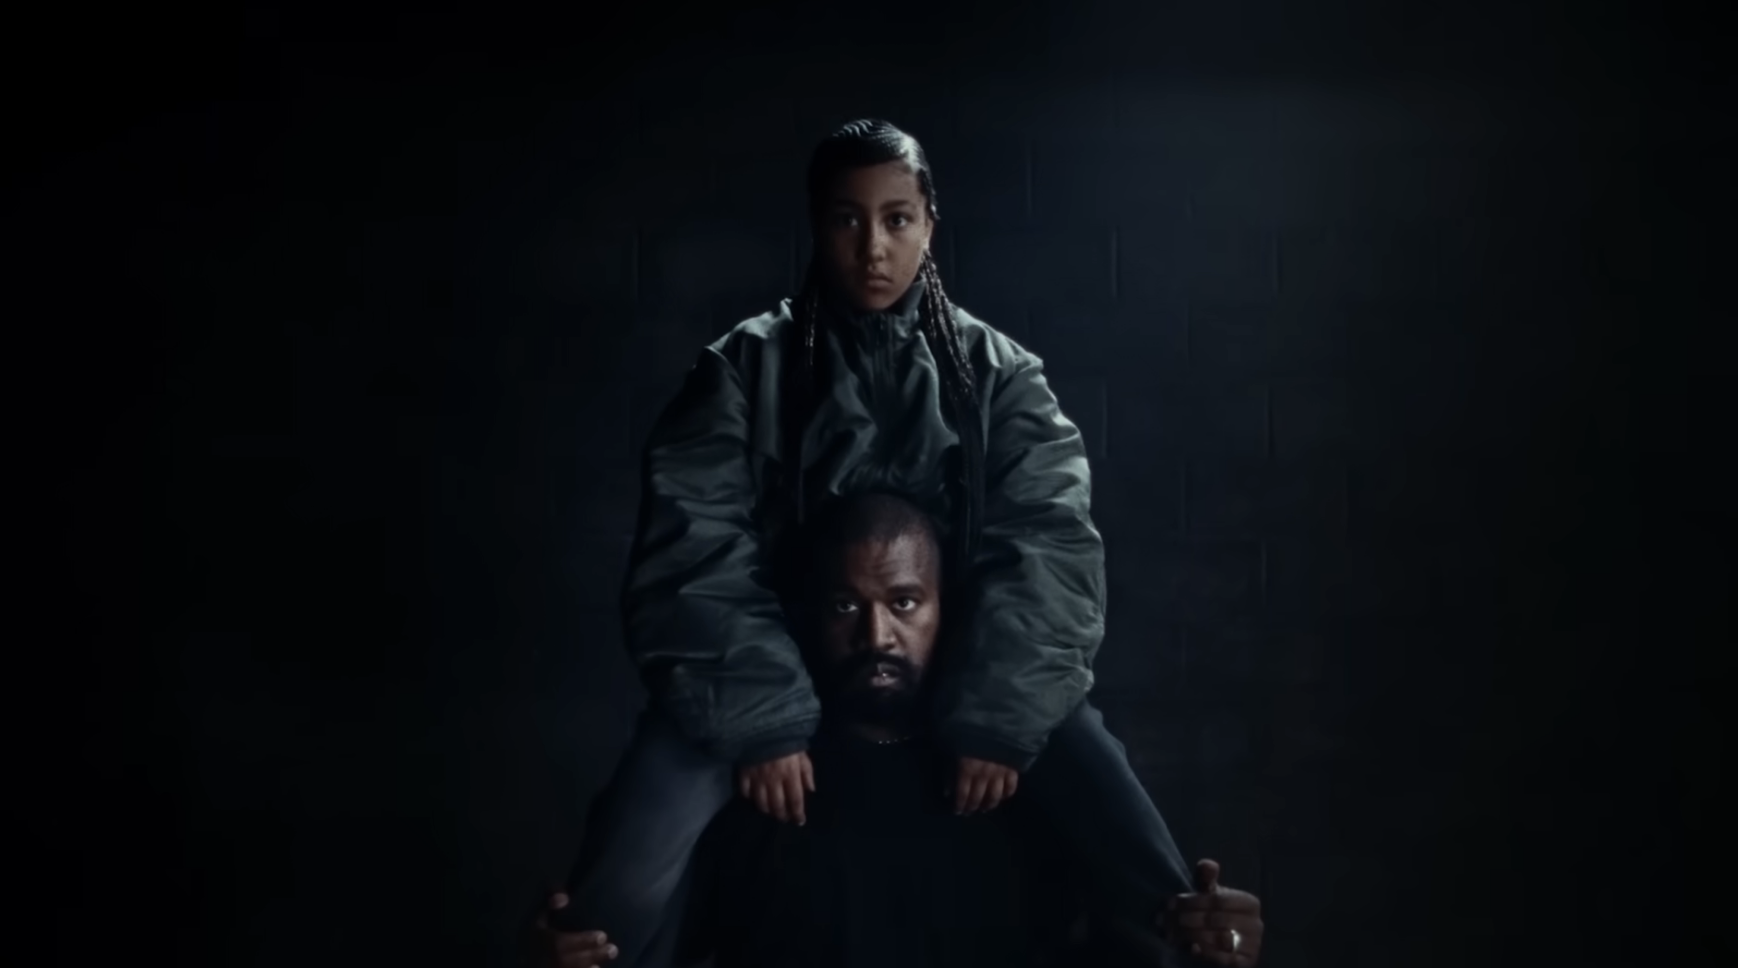 Two individuals in oversized jackets against a dark background, one seated and one standing behind with arms resting on the seated person&#x27;s shoulders